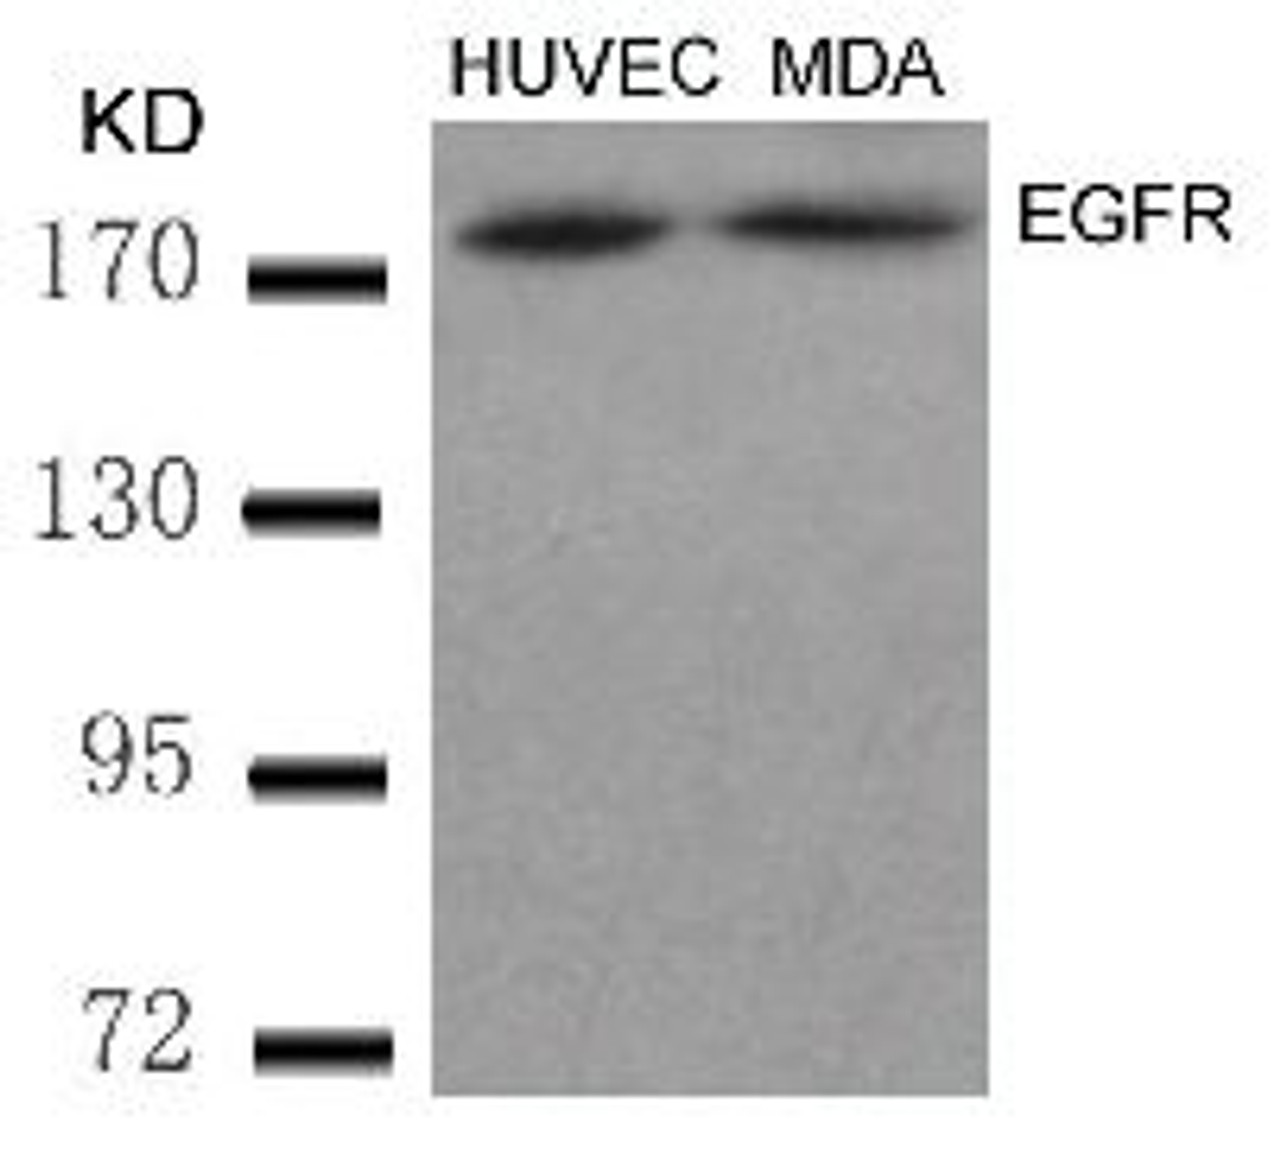 Western blot analysis of lysed extracts from HUVEC and MDA cells using EGFR (Ab-869) .